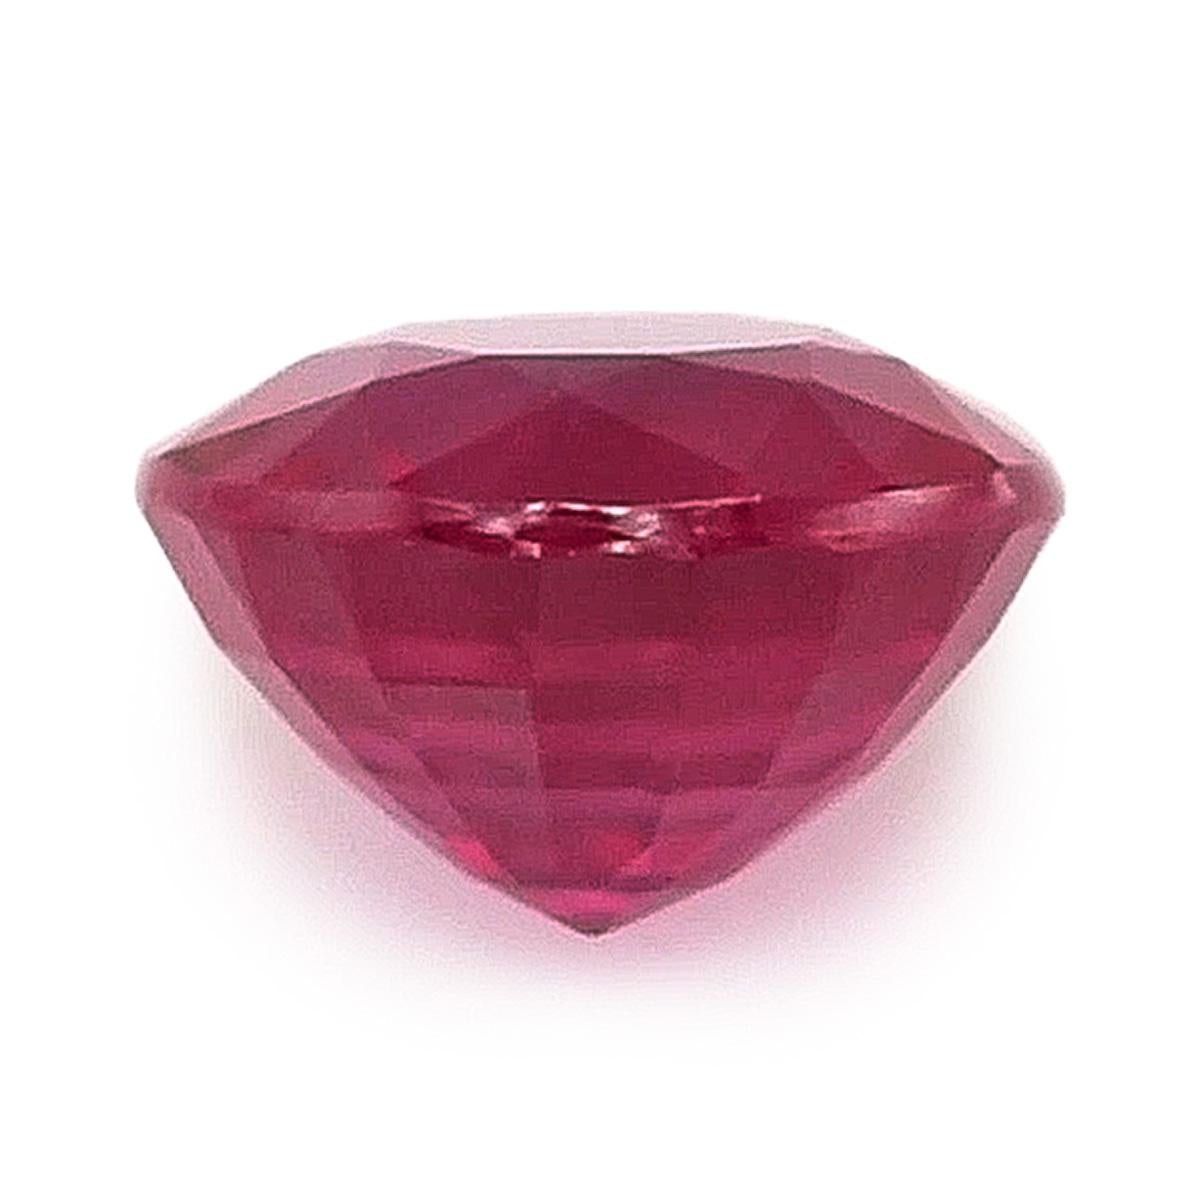 Brilliant Cut GIA Certified 1.07 Carats Natural Burma Ruby, Ruby Gemstone, July Birthstone For Sale